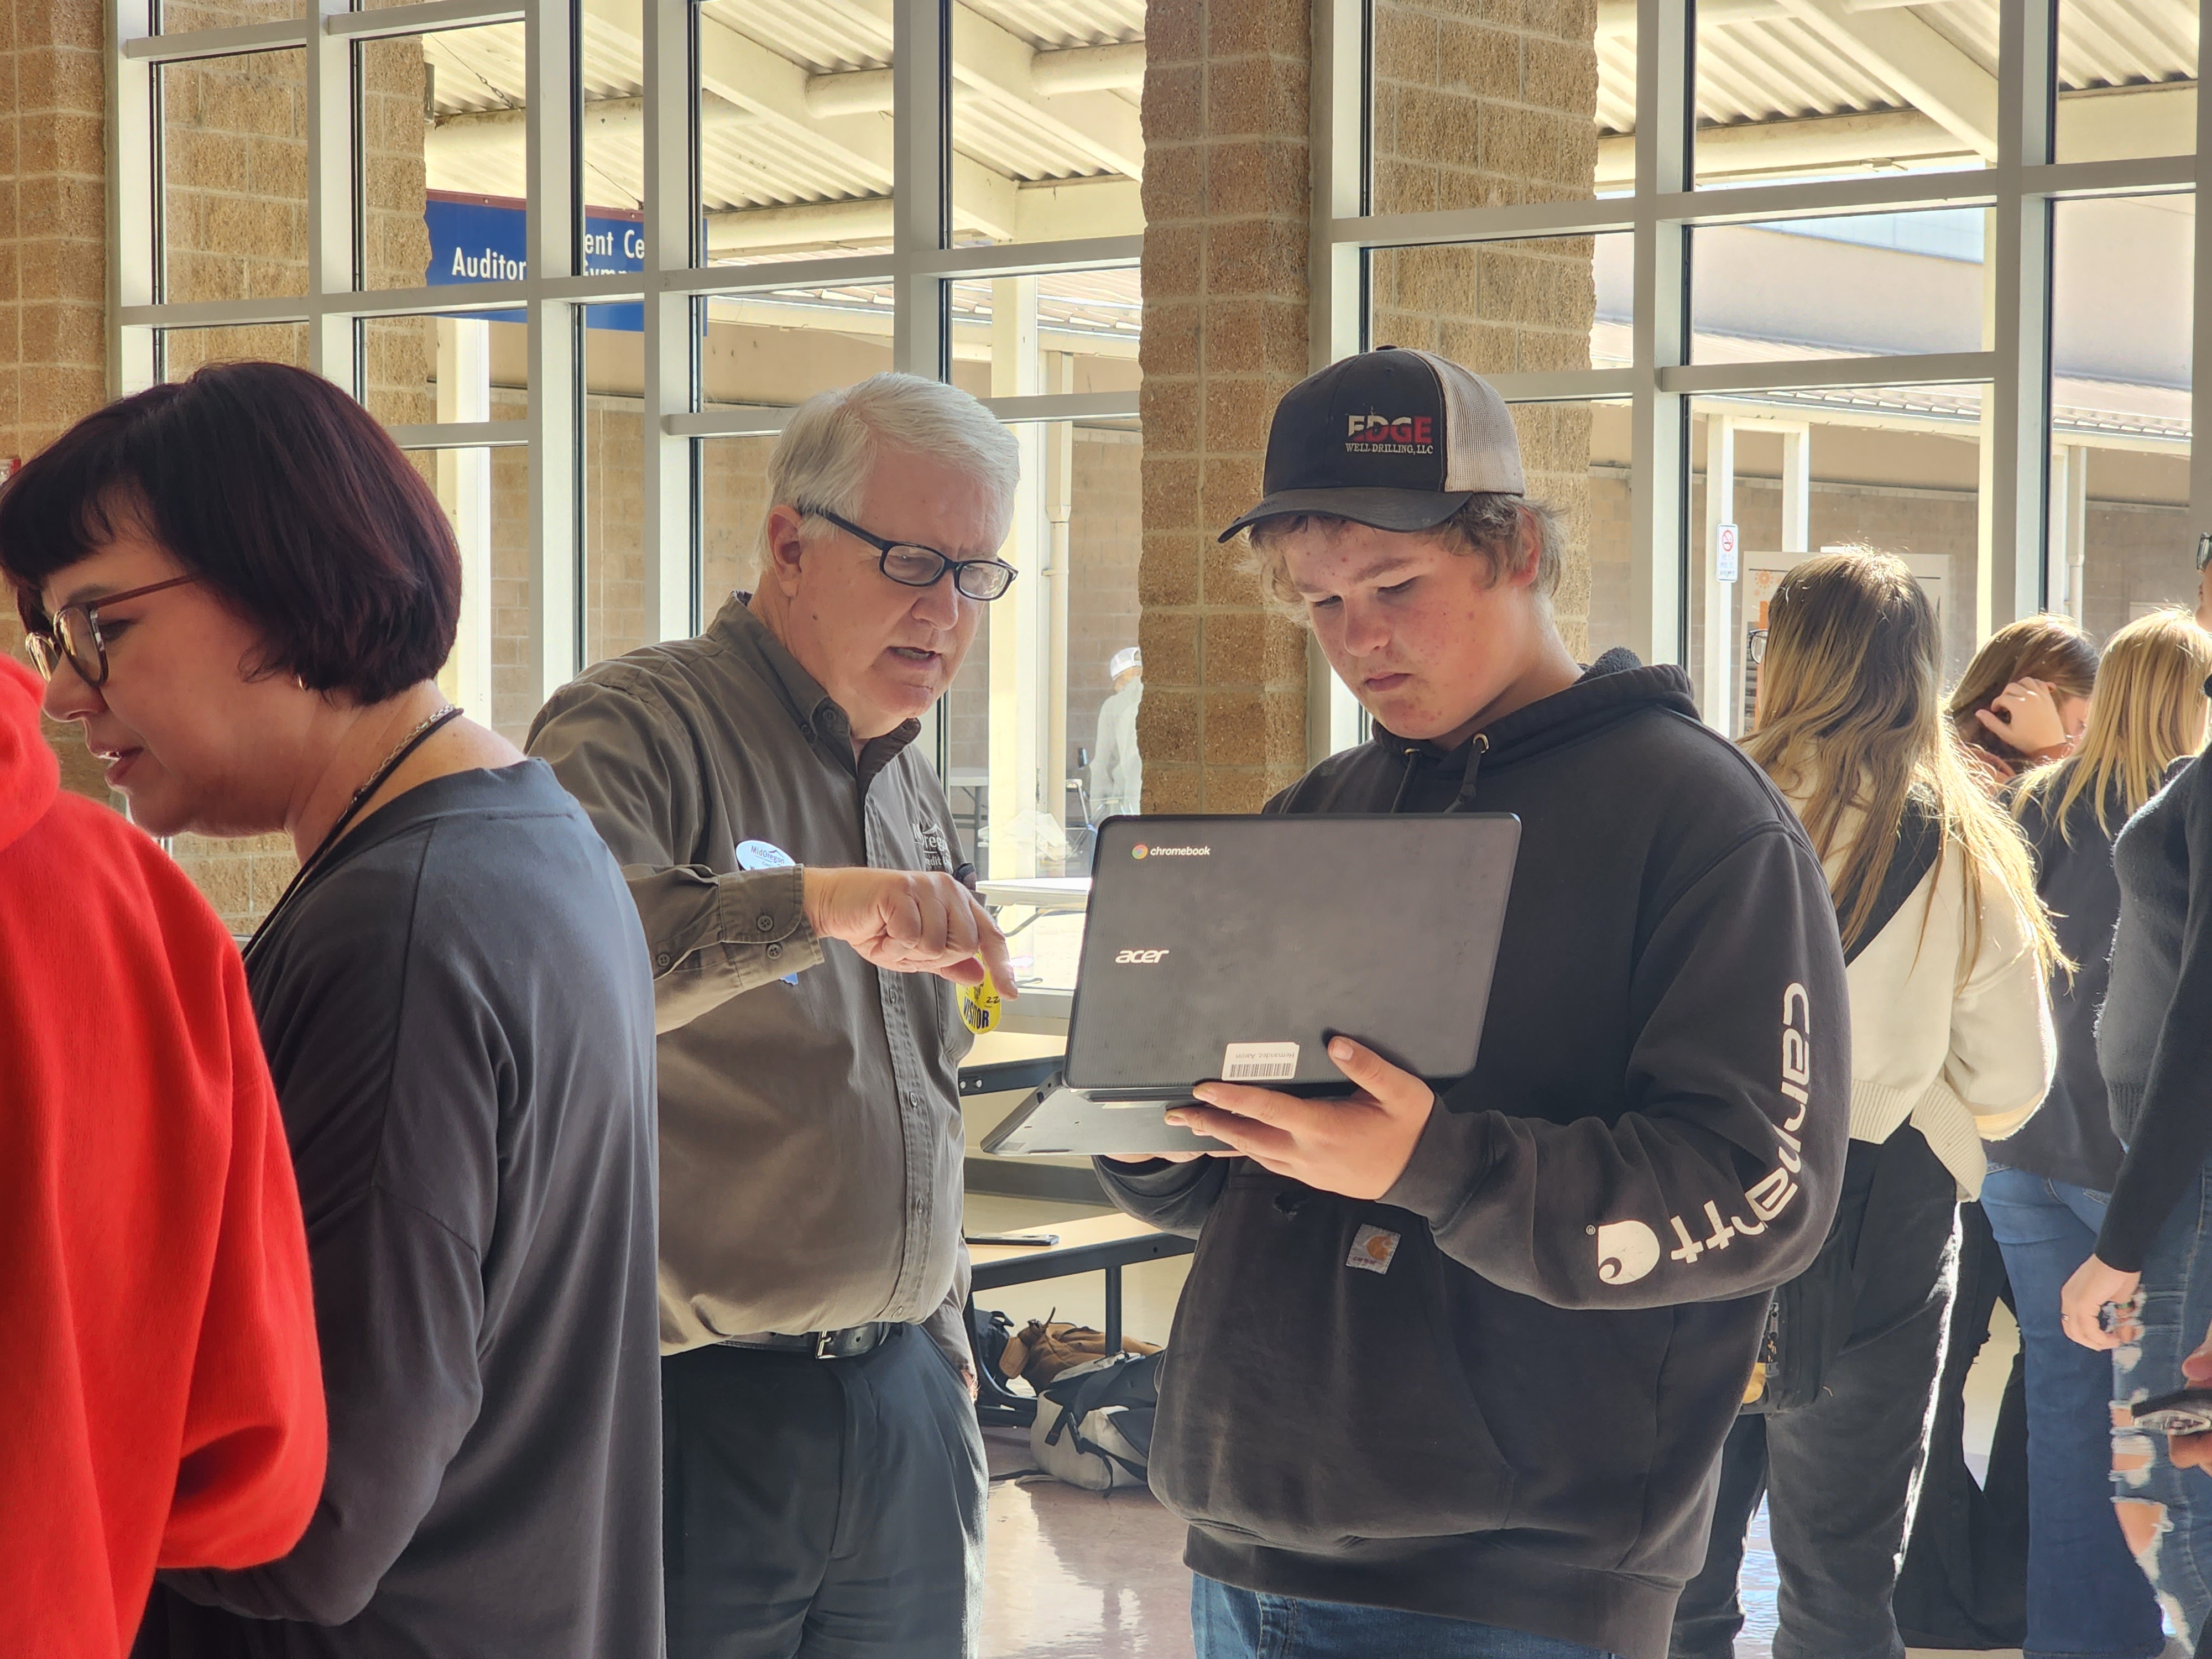 Mid Oregon team members work with students from Crook County High School during a Bite of Reality budgeting simulation